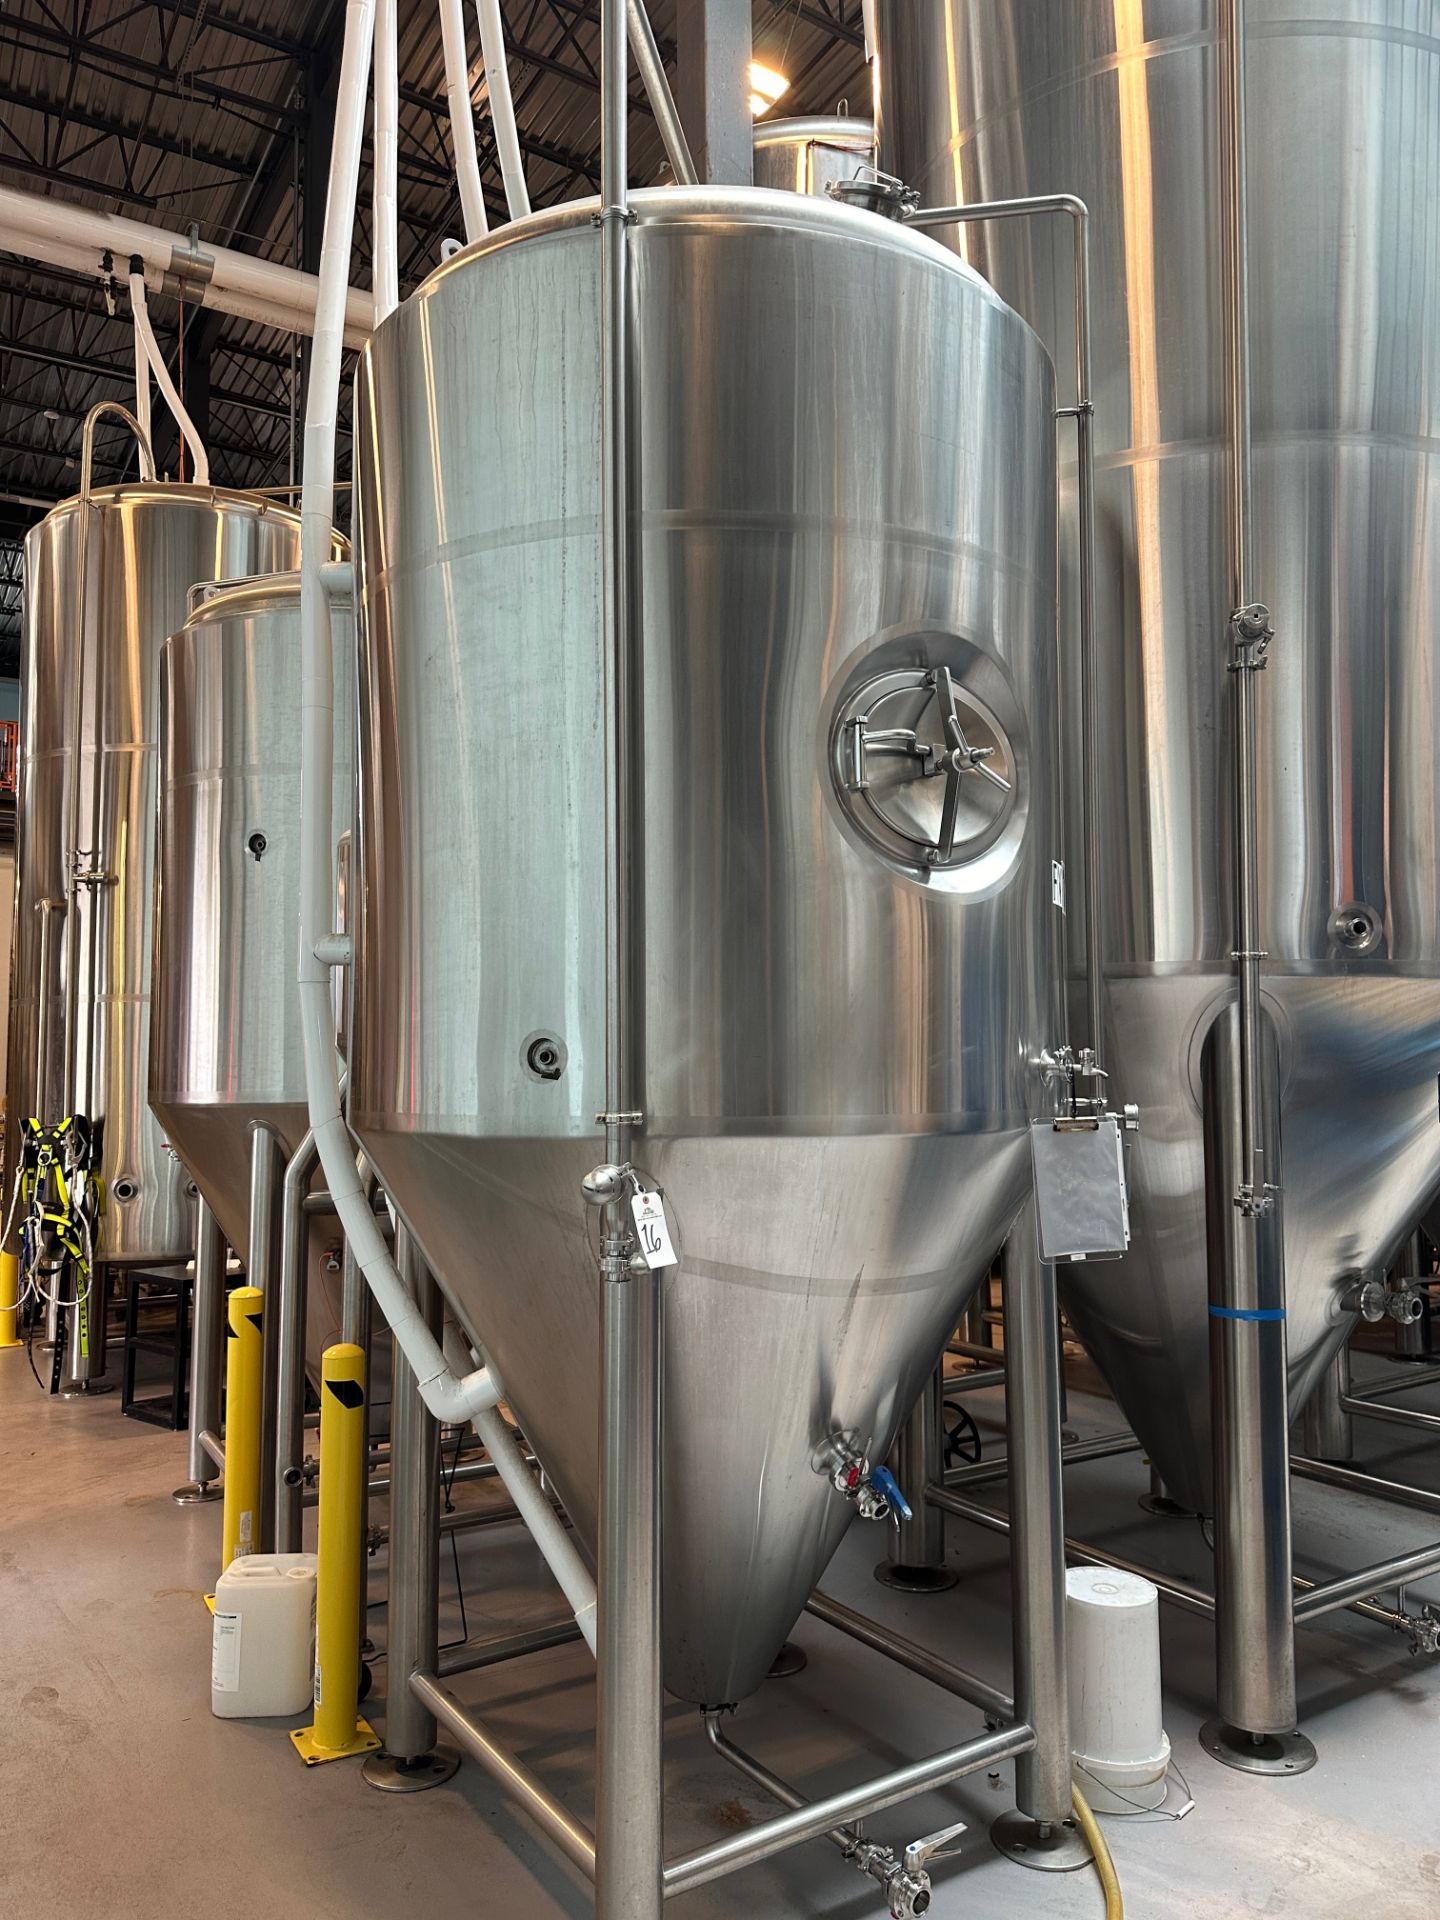 Complete 40 BBL Microbrewery - 40 BBL Deutsche 4-Vessel Brewhouse, Tanks, Can Line - See Description - Image 40 of 335